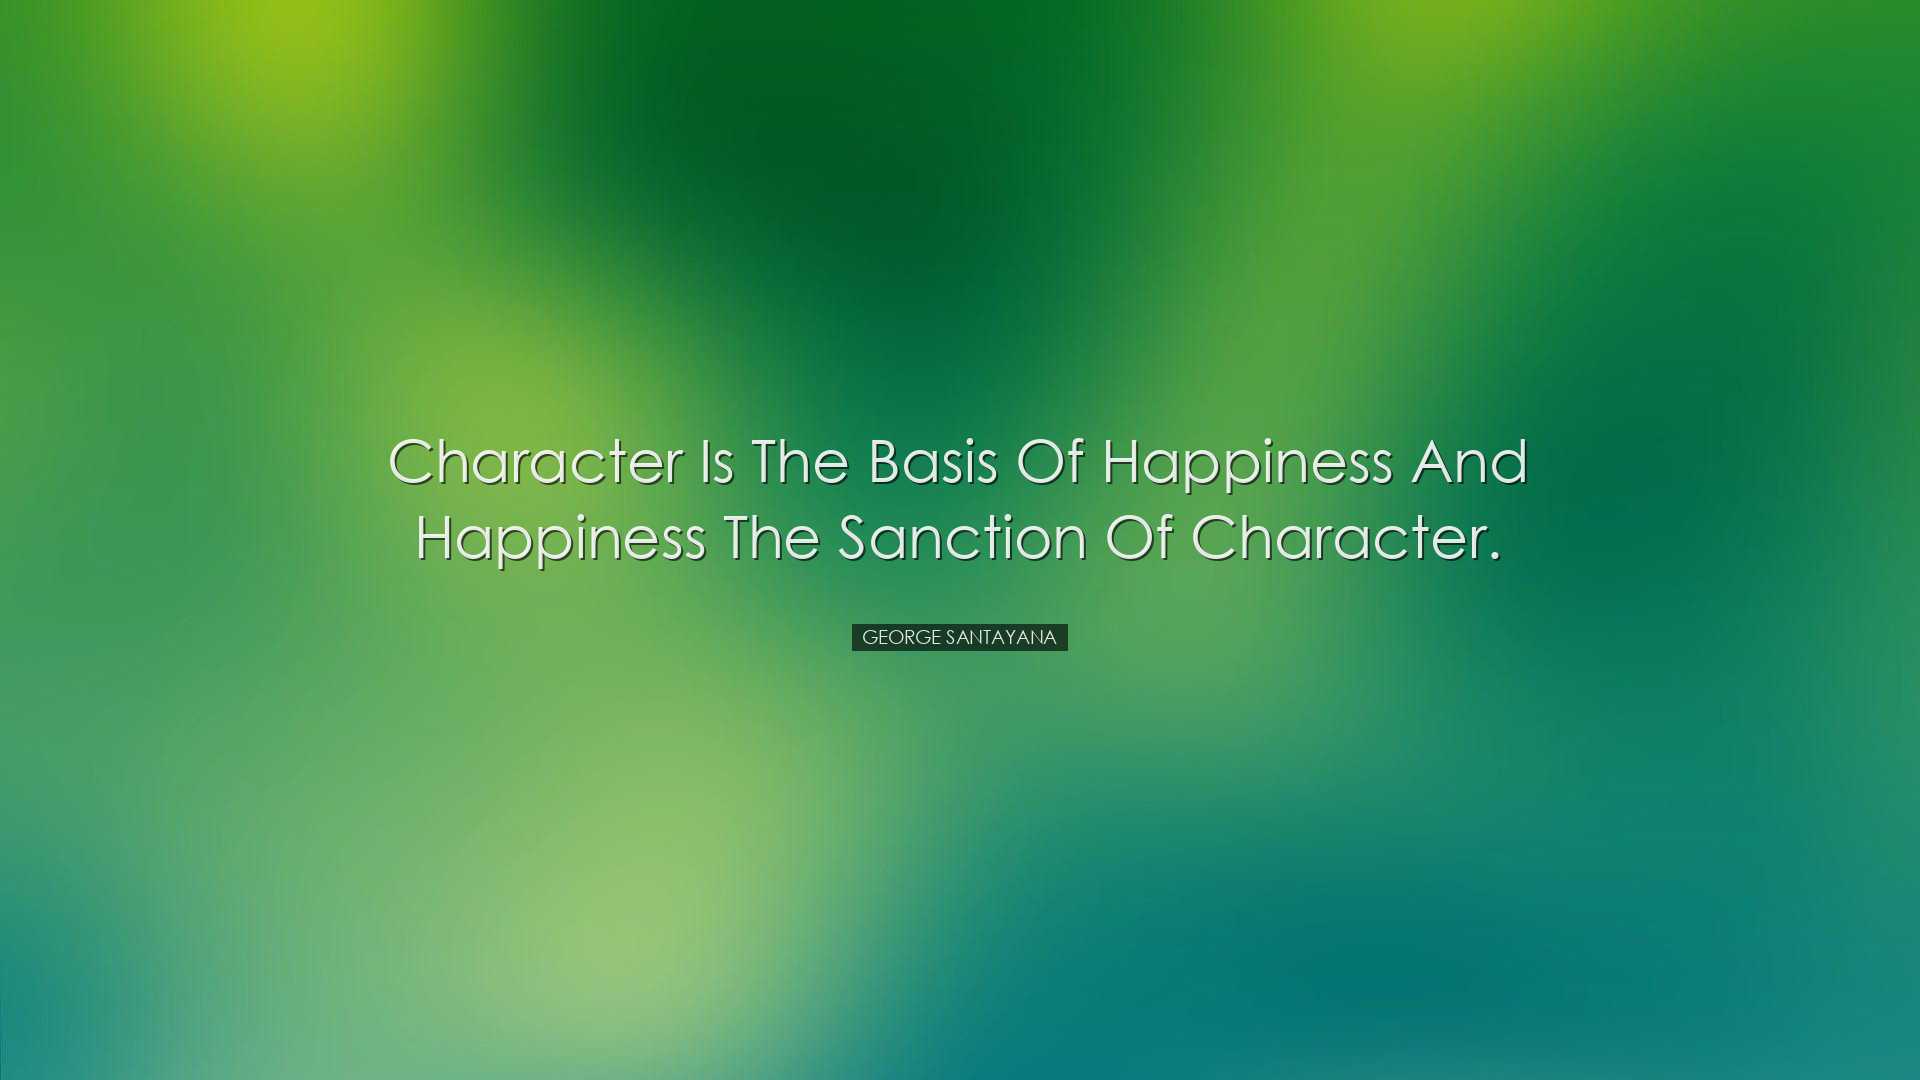 Character is the basis of happiness and happiness the sanction of